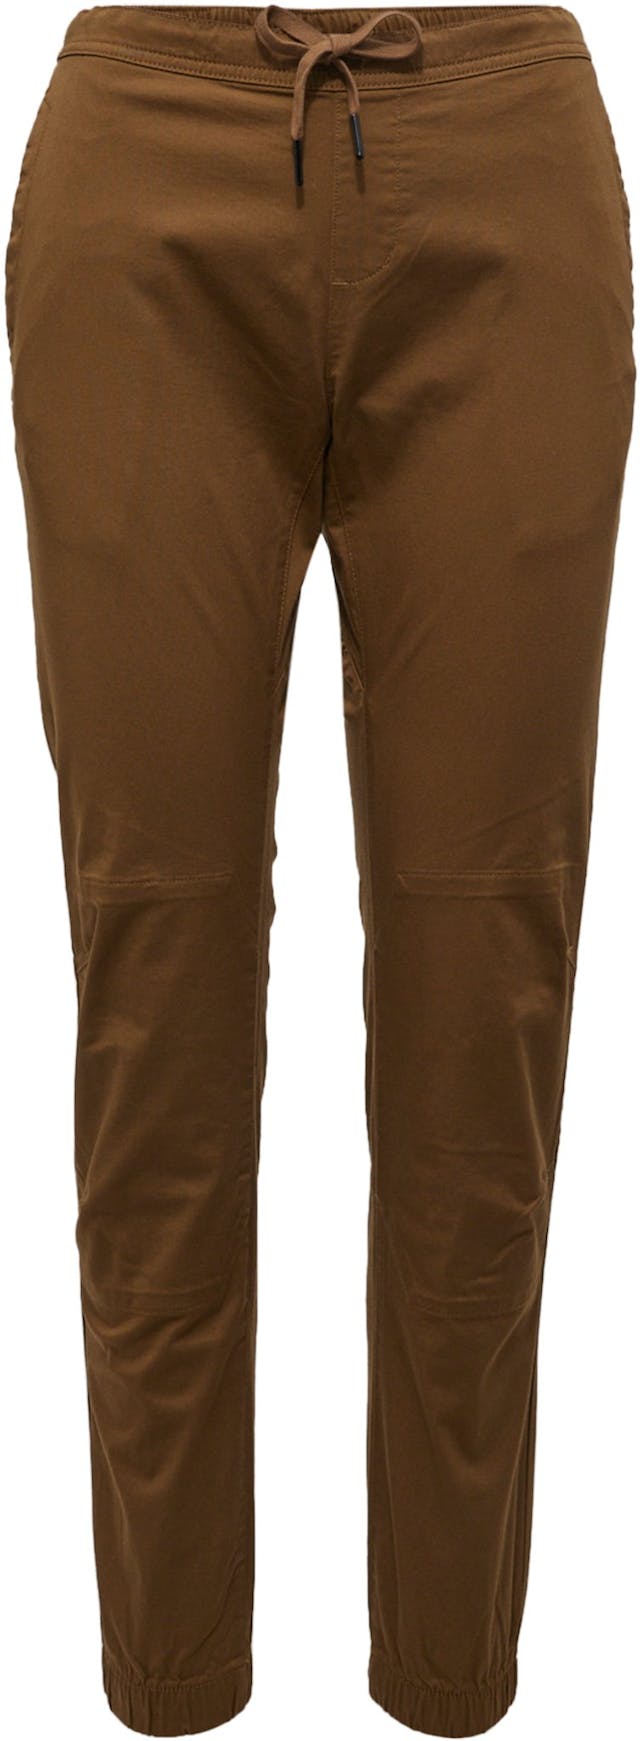 Product image for Notion Pants - Women's